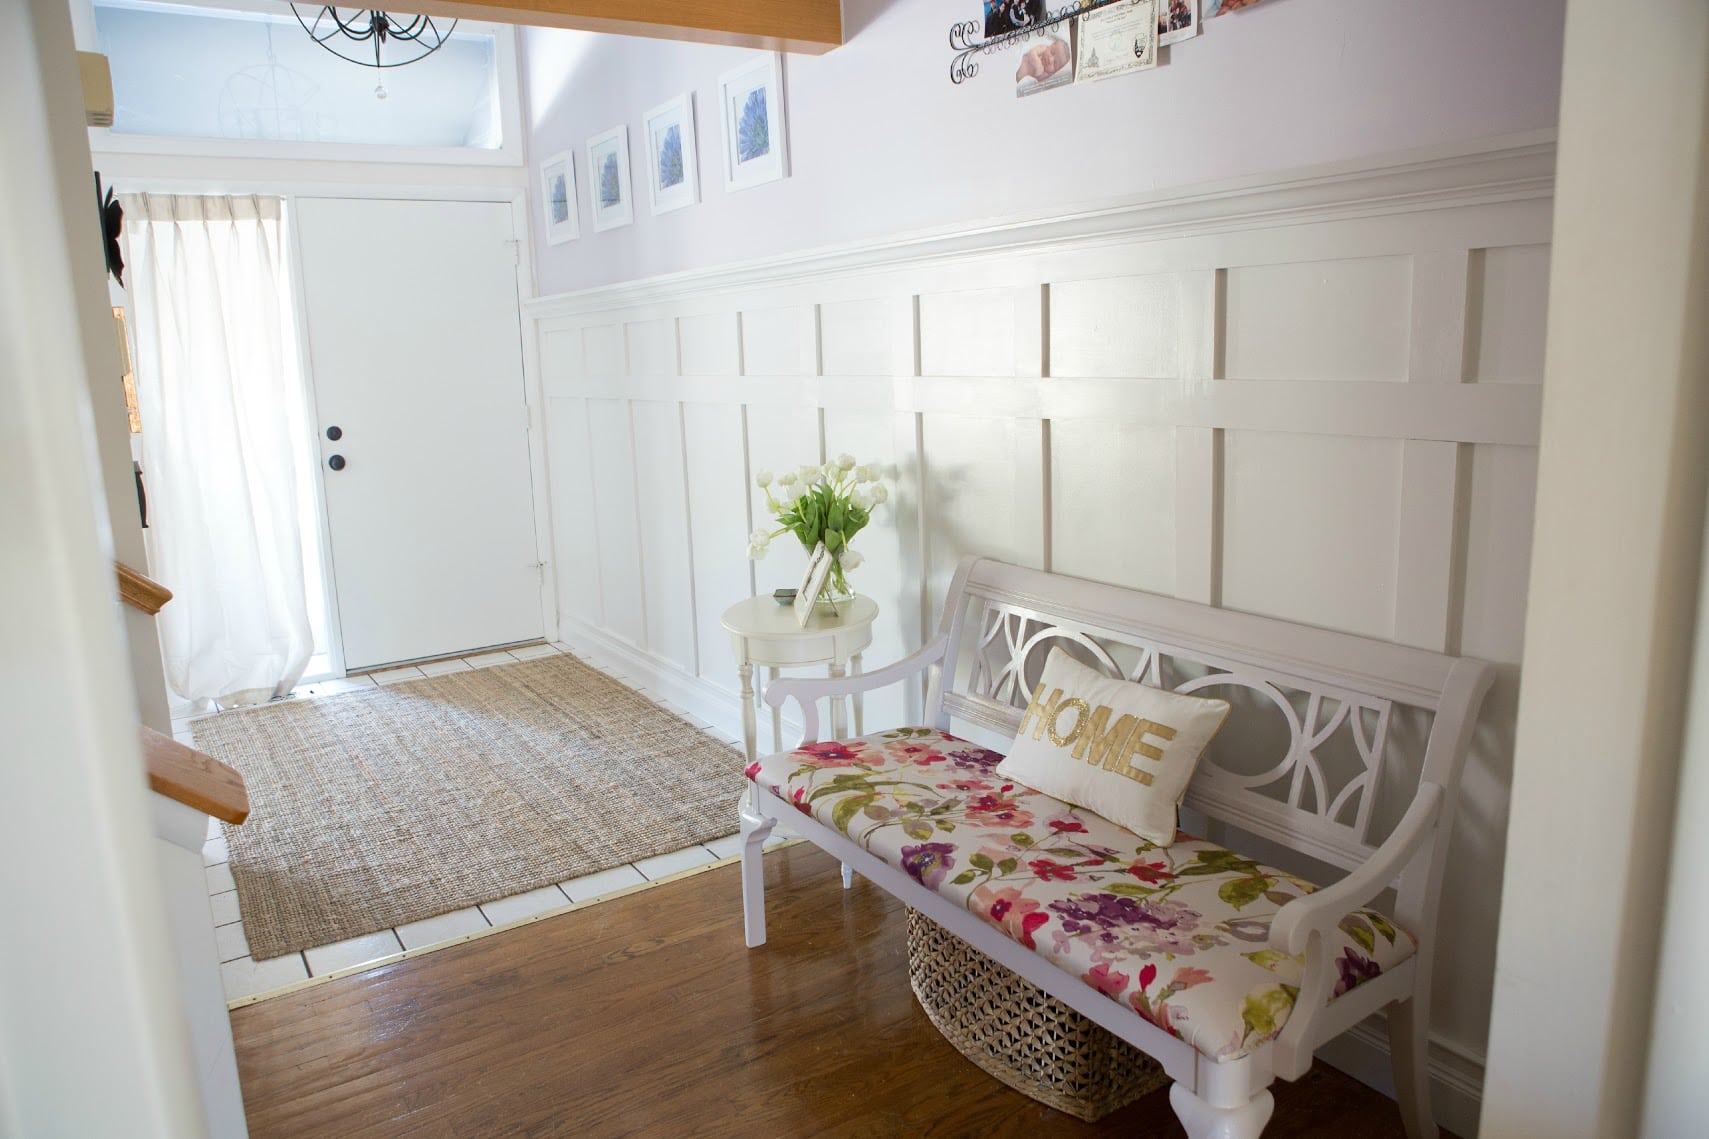 BEFORE & AFTER: Alex’s Prettiest Entryway EVER!